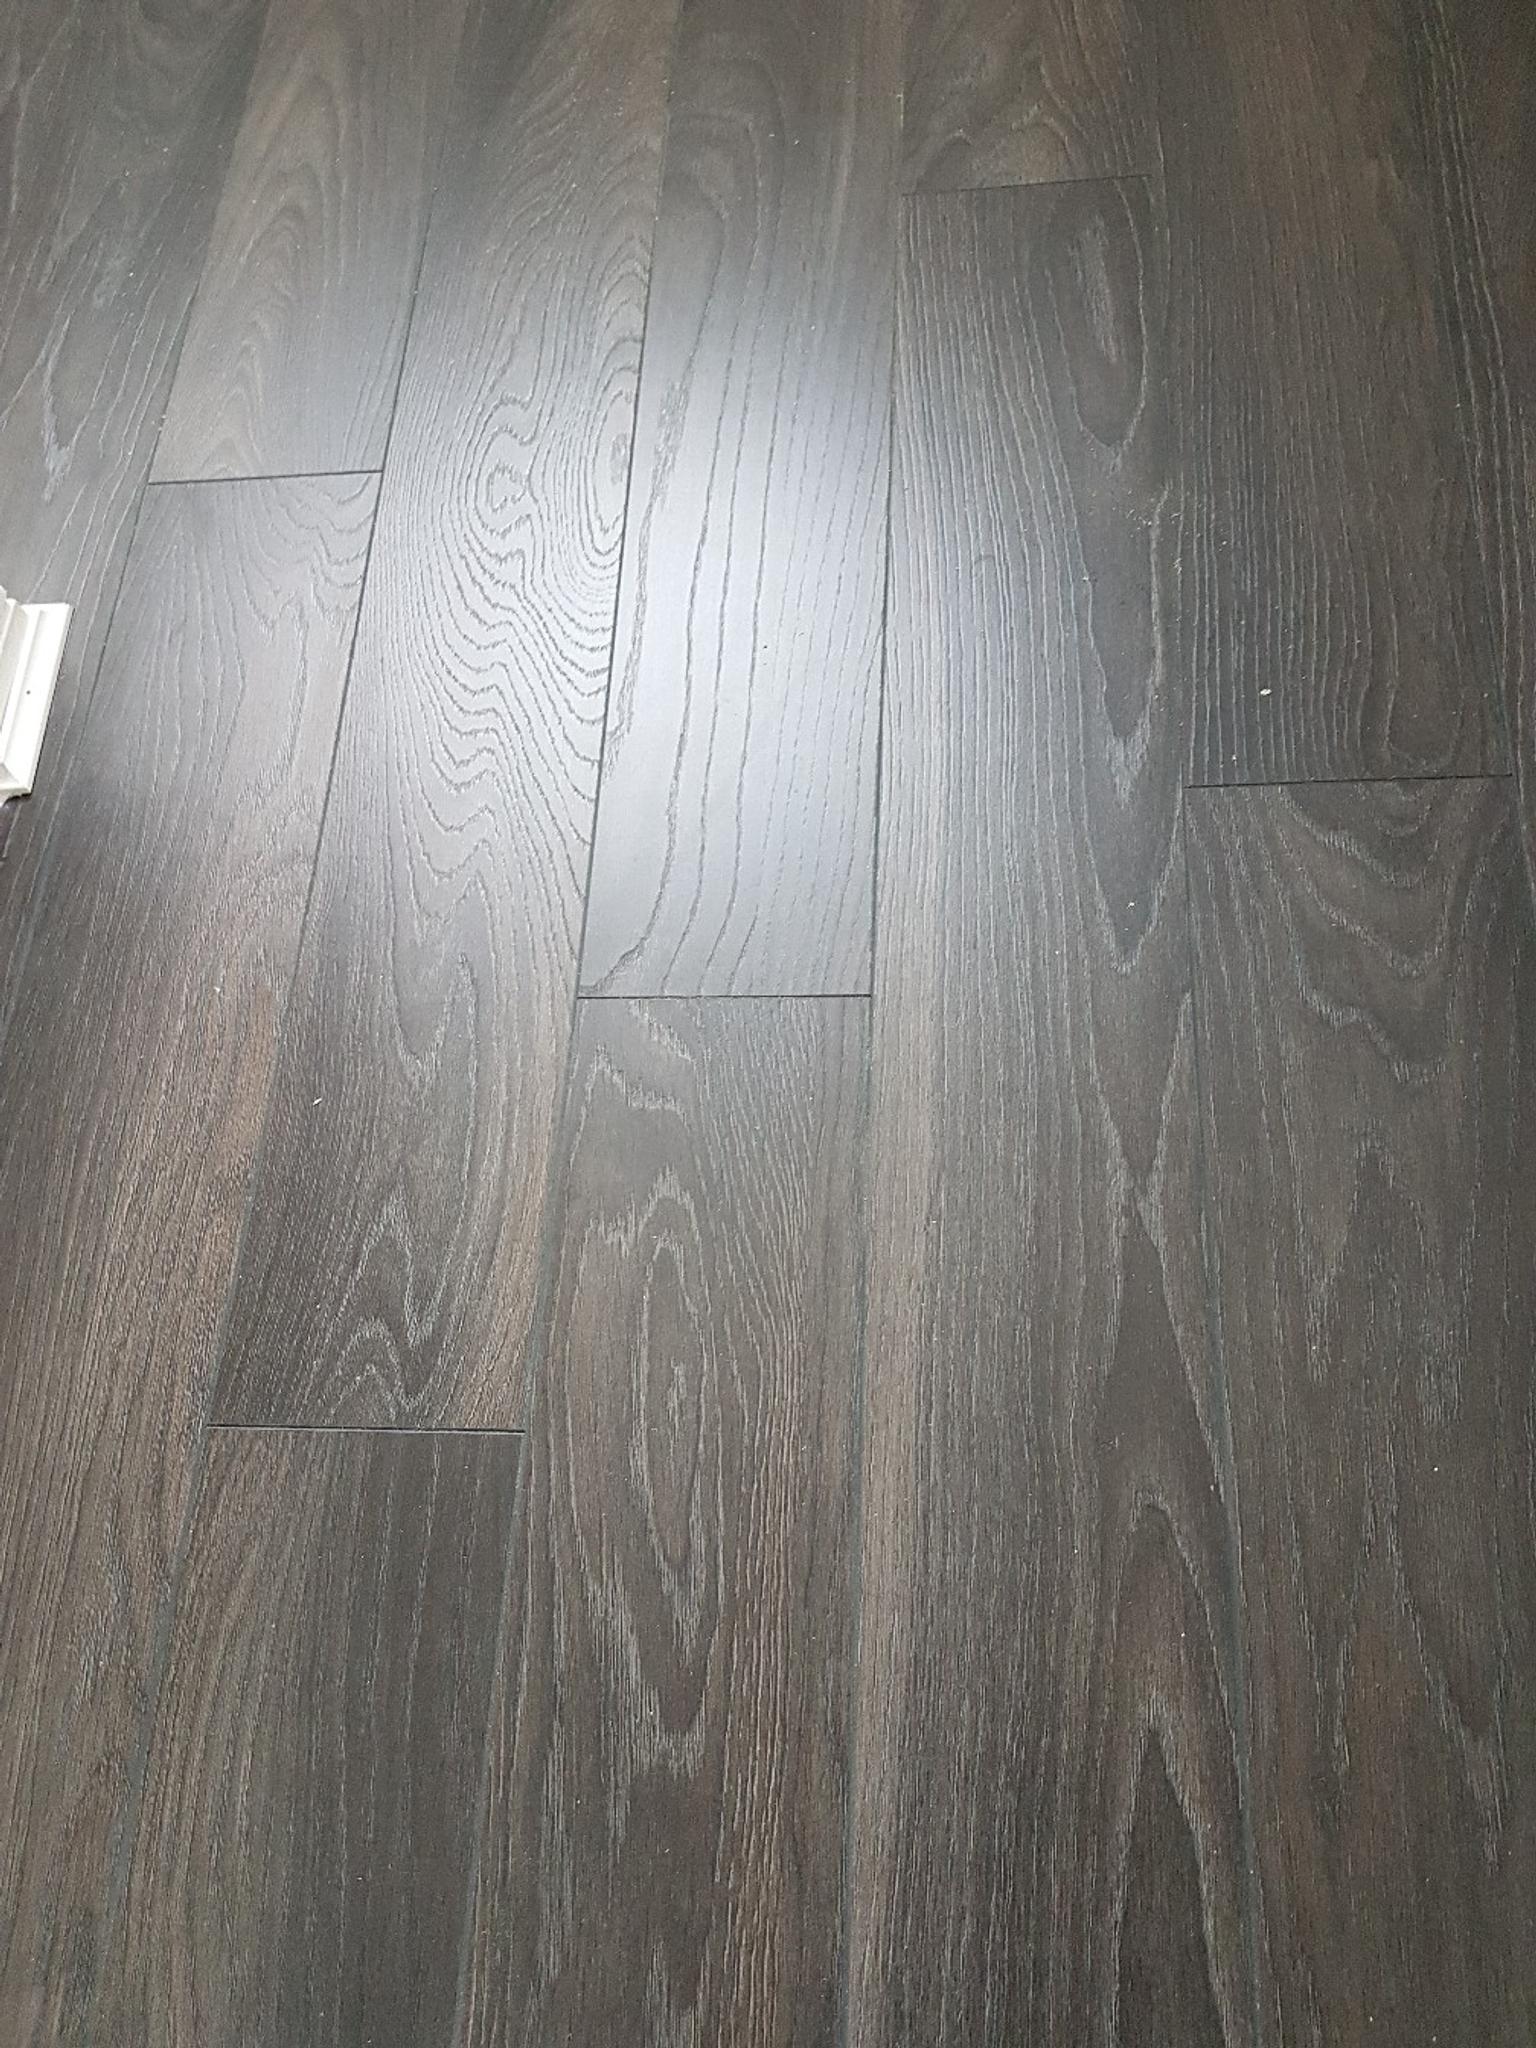 B Q Victoria Oak Laminate Flooring In Dy8 Dudley For 70 00 For